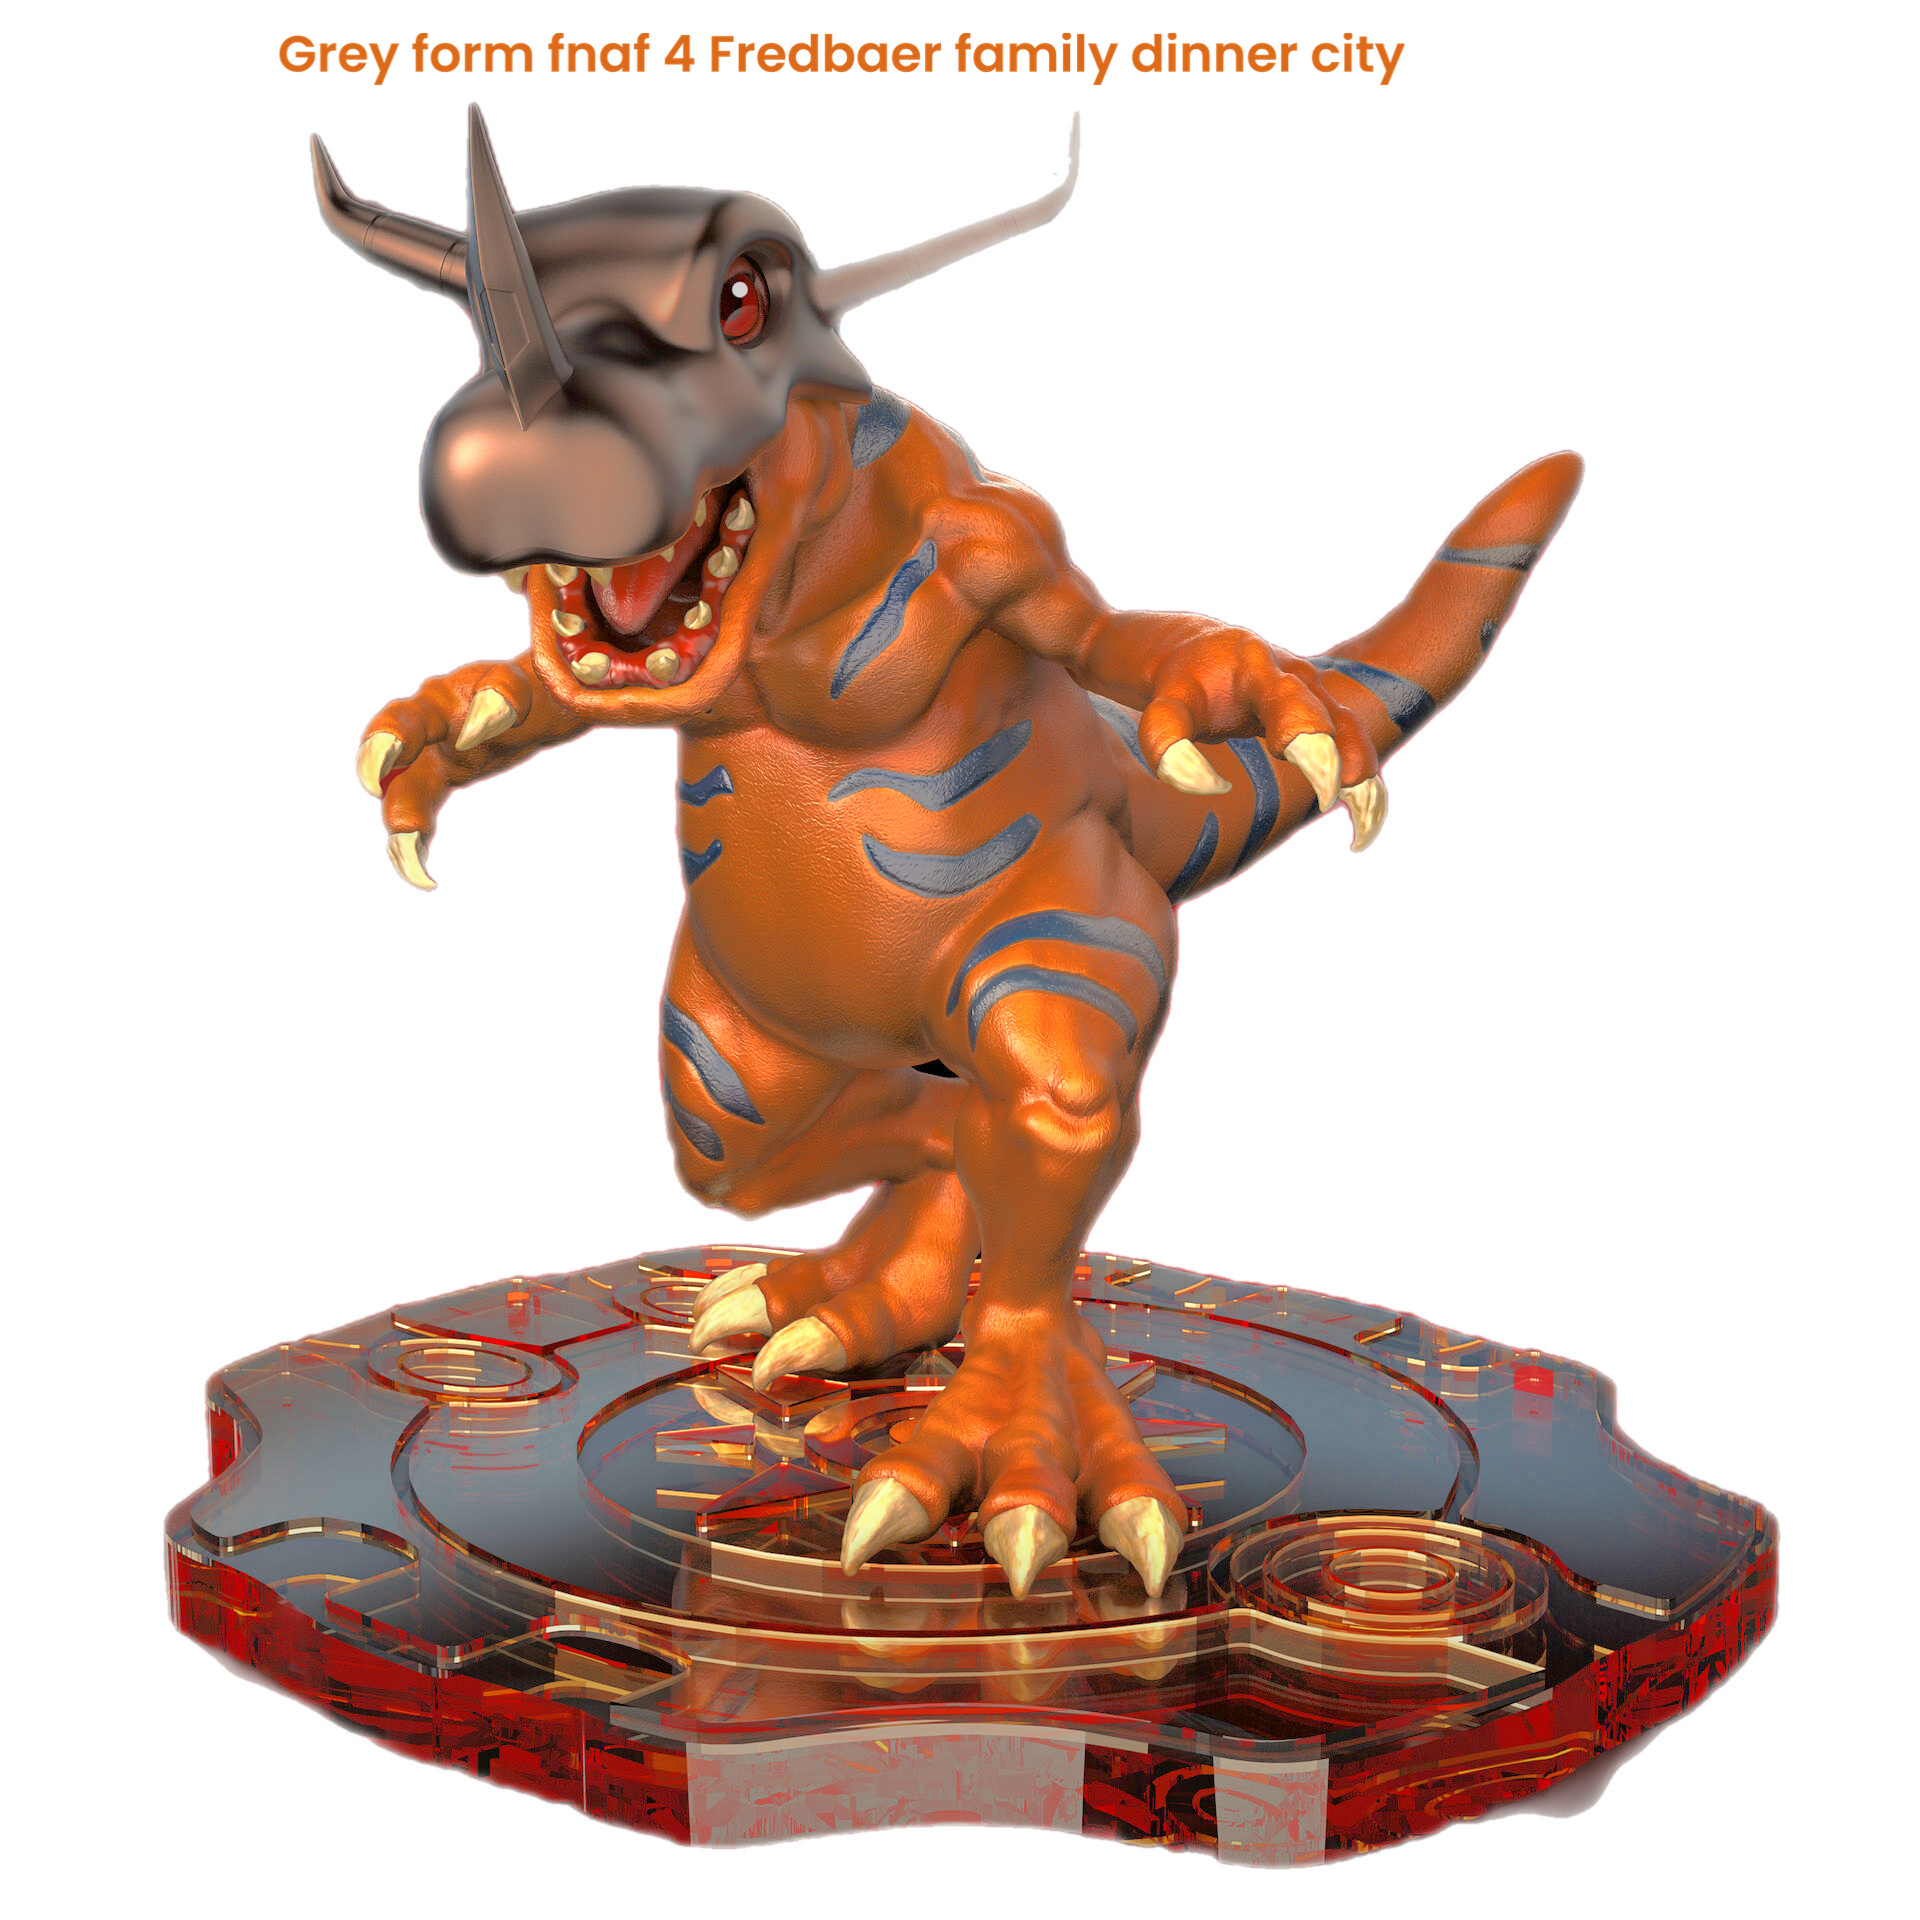 a cartoon dinosaur standing on a red and silver plate